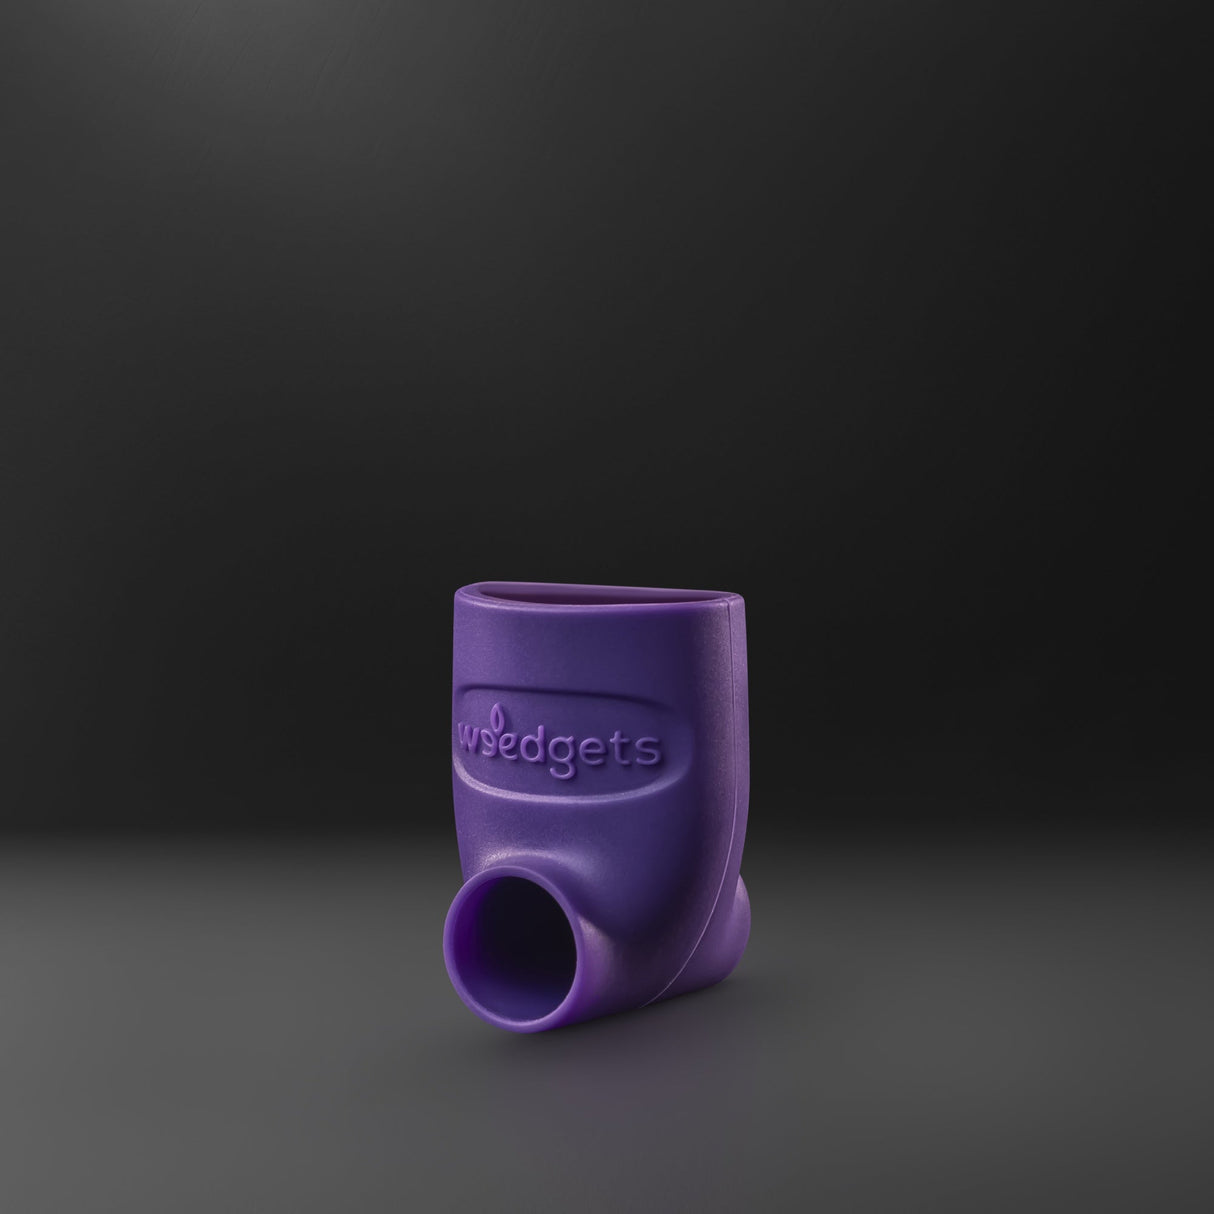 Sili-Scoop Weed Loading Tool in purple, front view on a black background, easy to use and clean